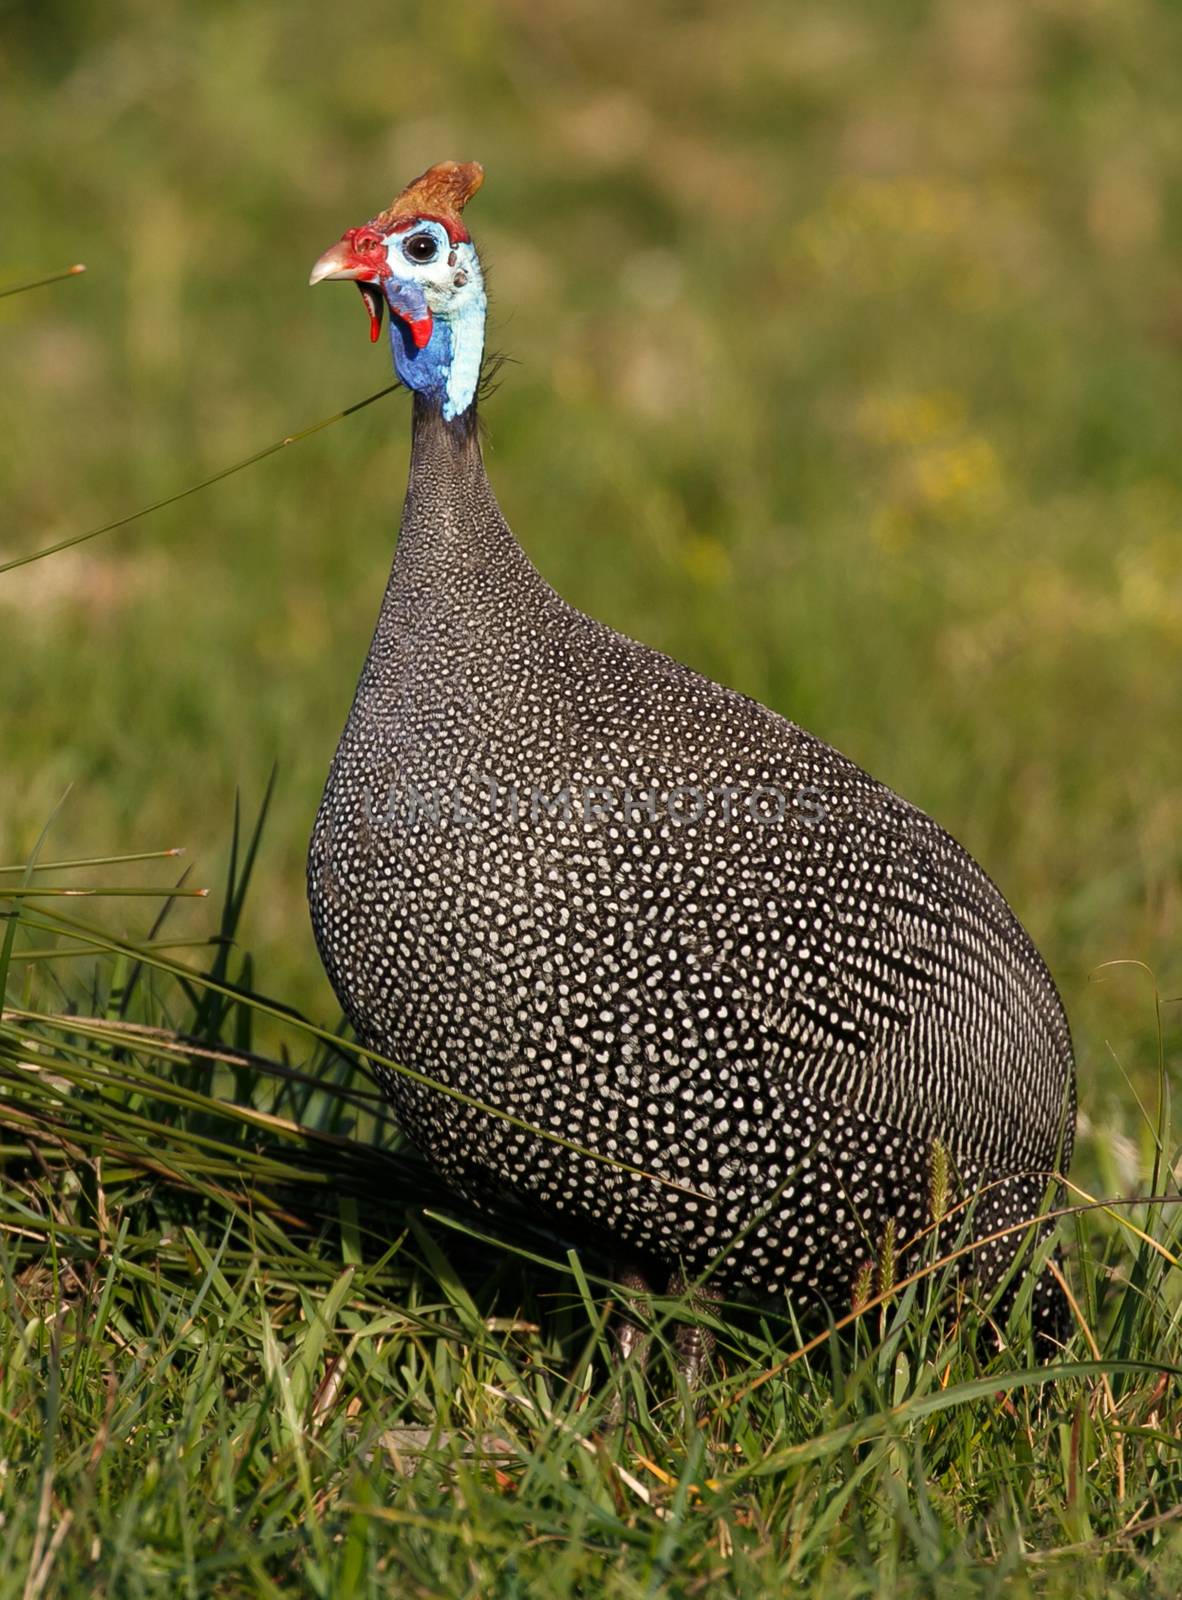 Helmeted Guinea fowl with white spotted feathers